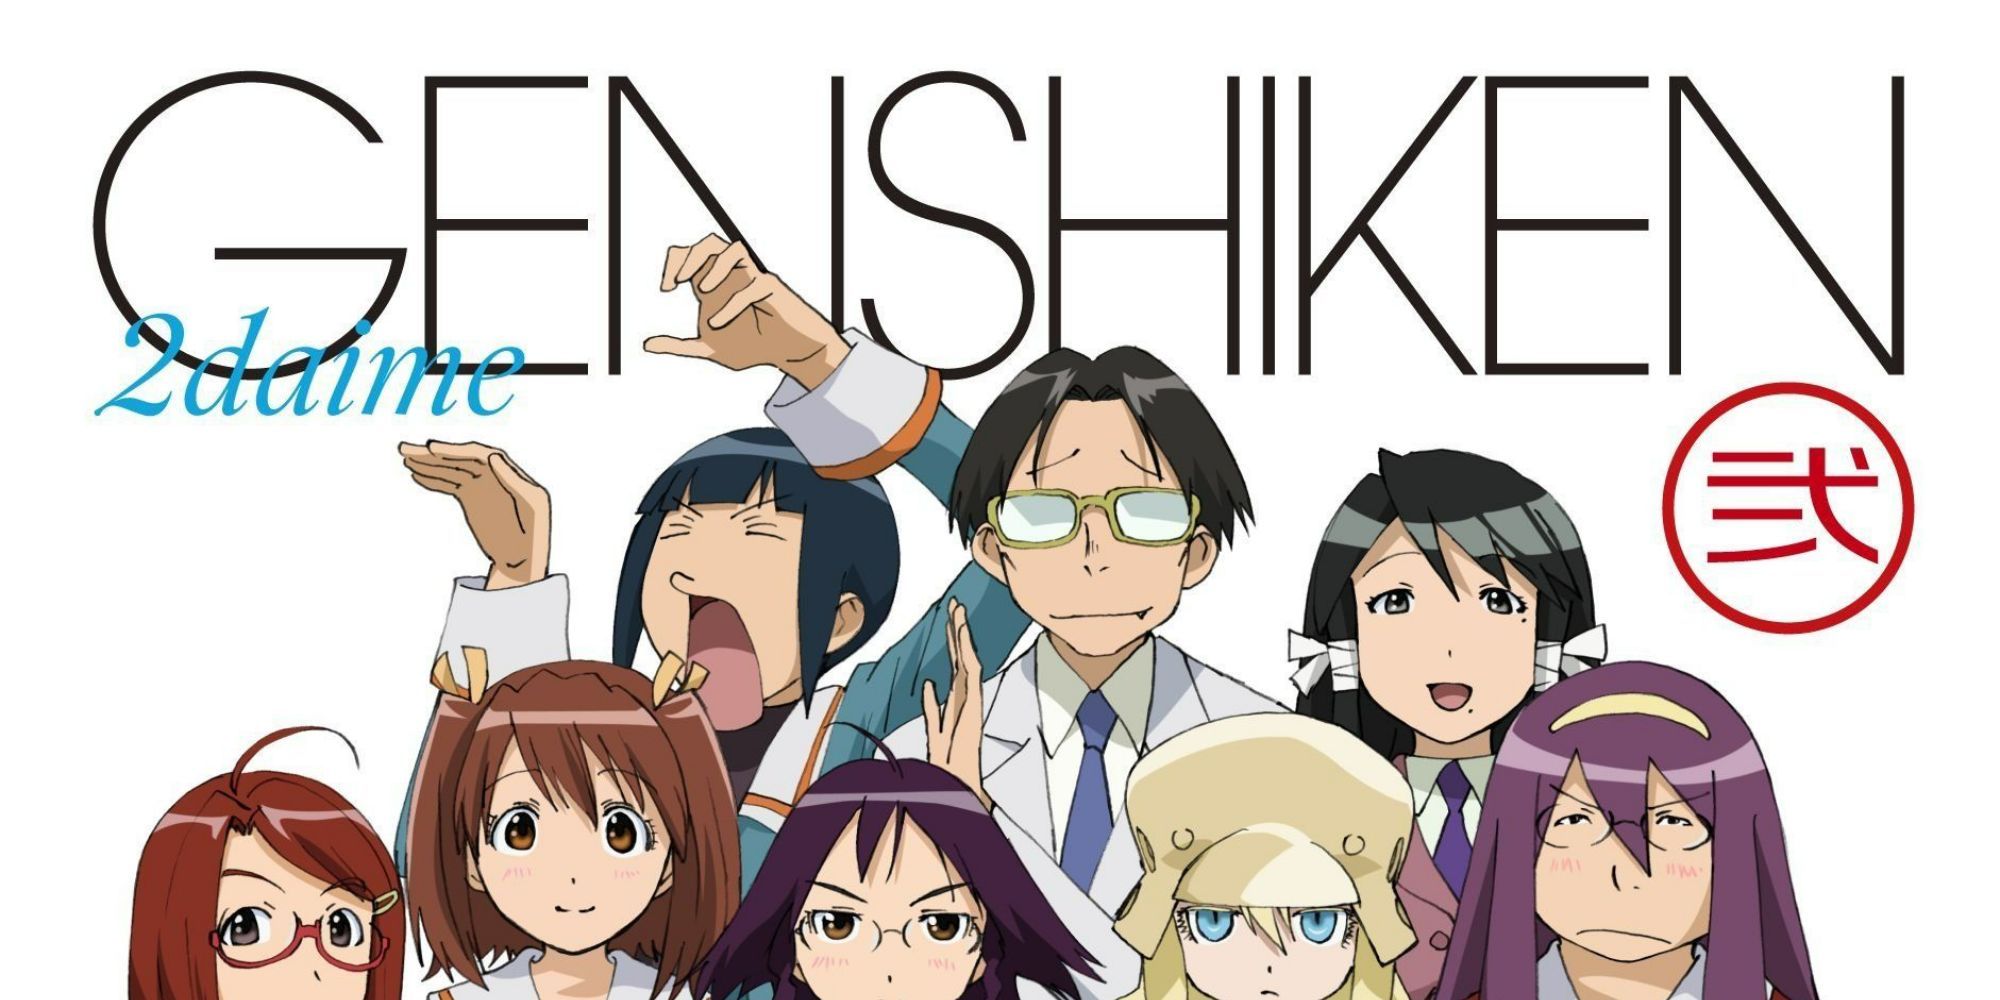 The title card for Genshiken featuring the cast